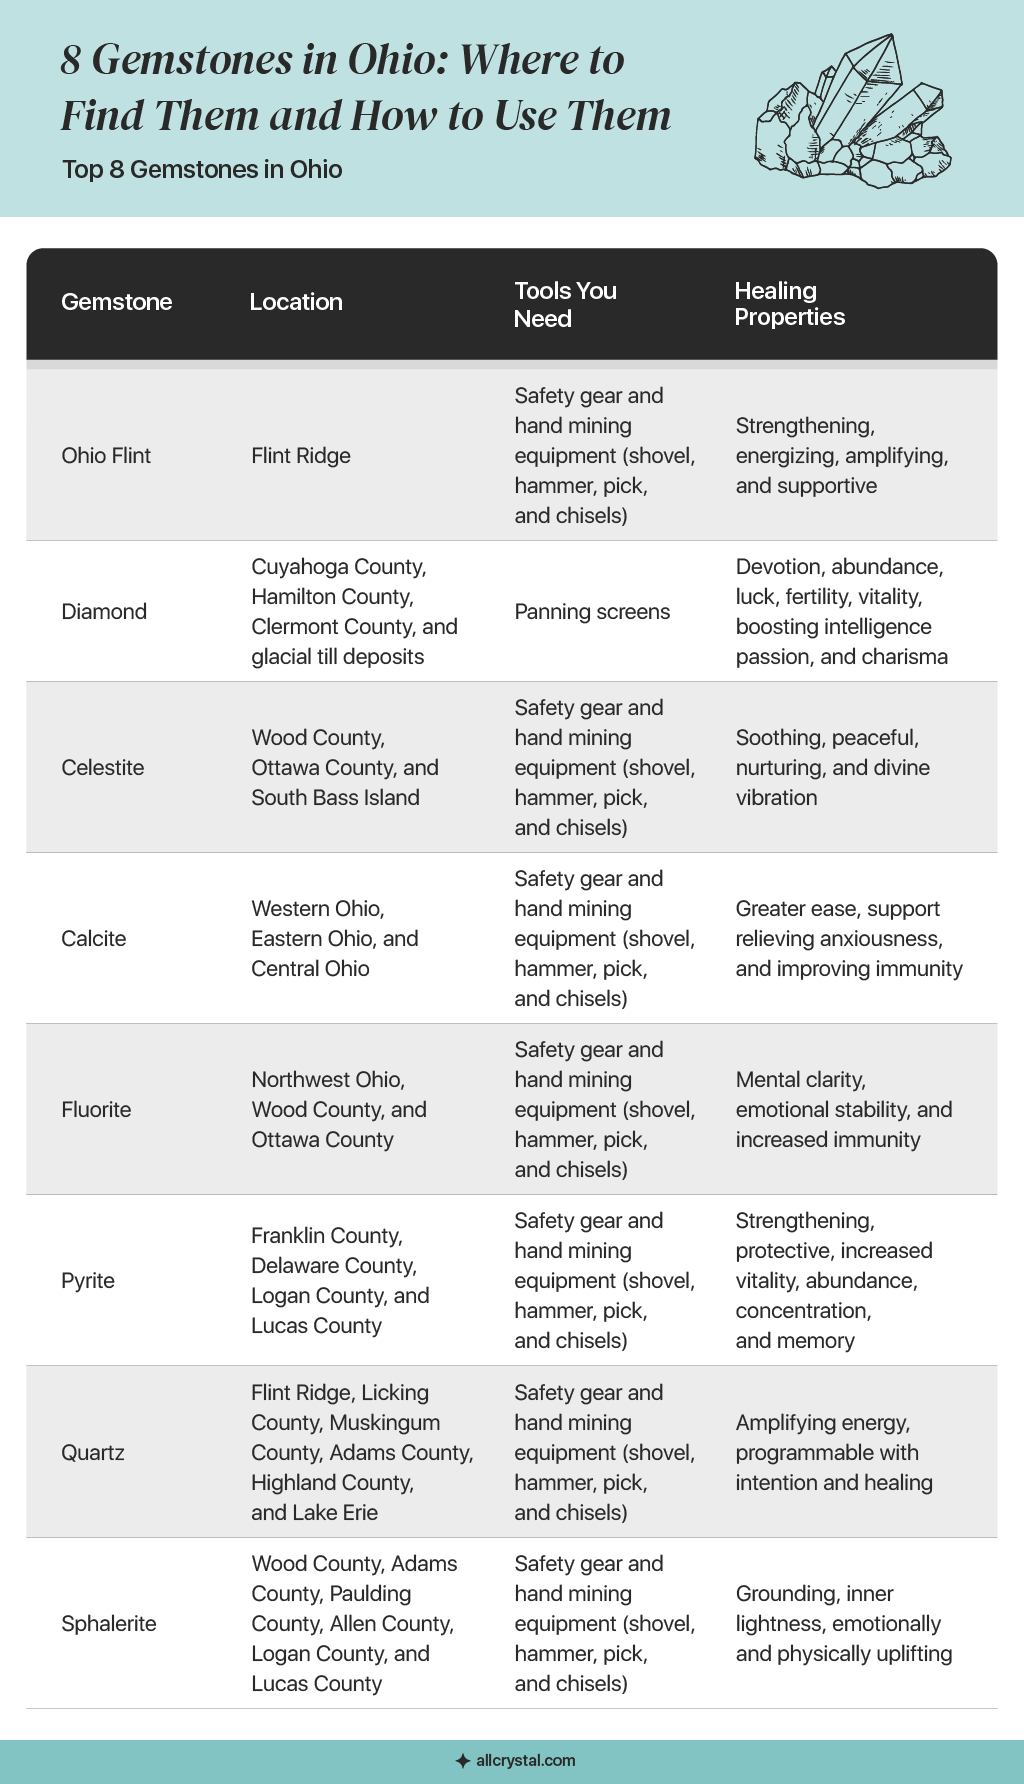 A graphic table containing information about 8 Gemstones in Ohio: Where to Find Them and How to Use Them